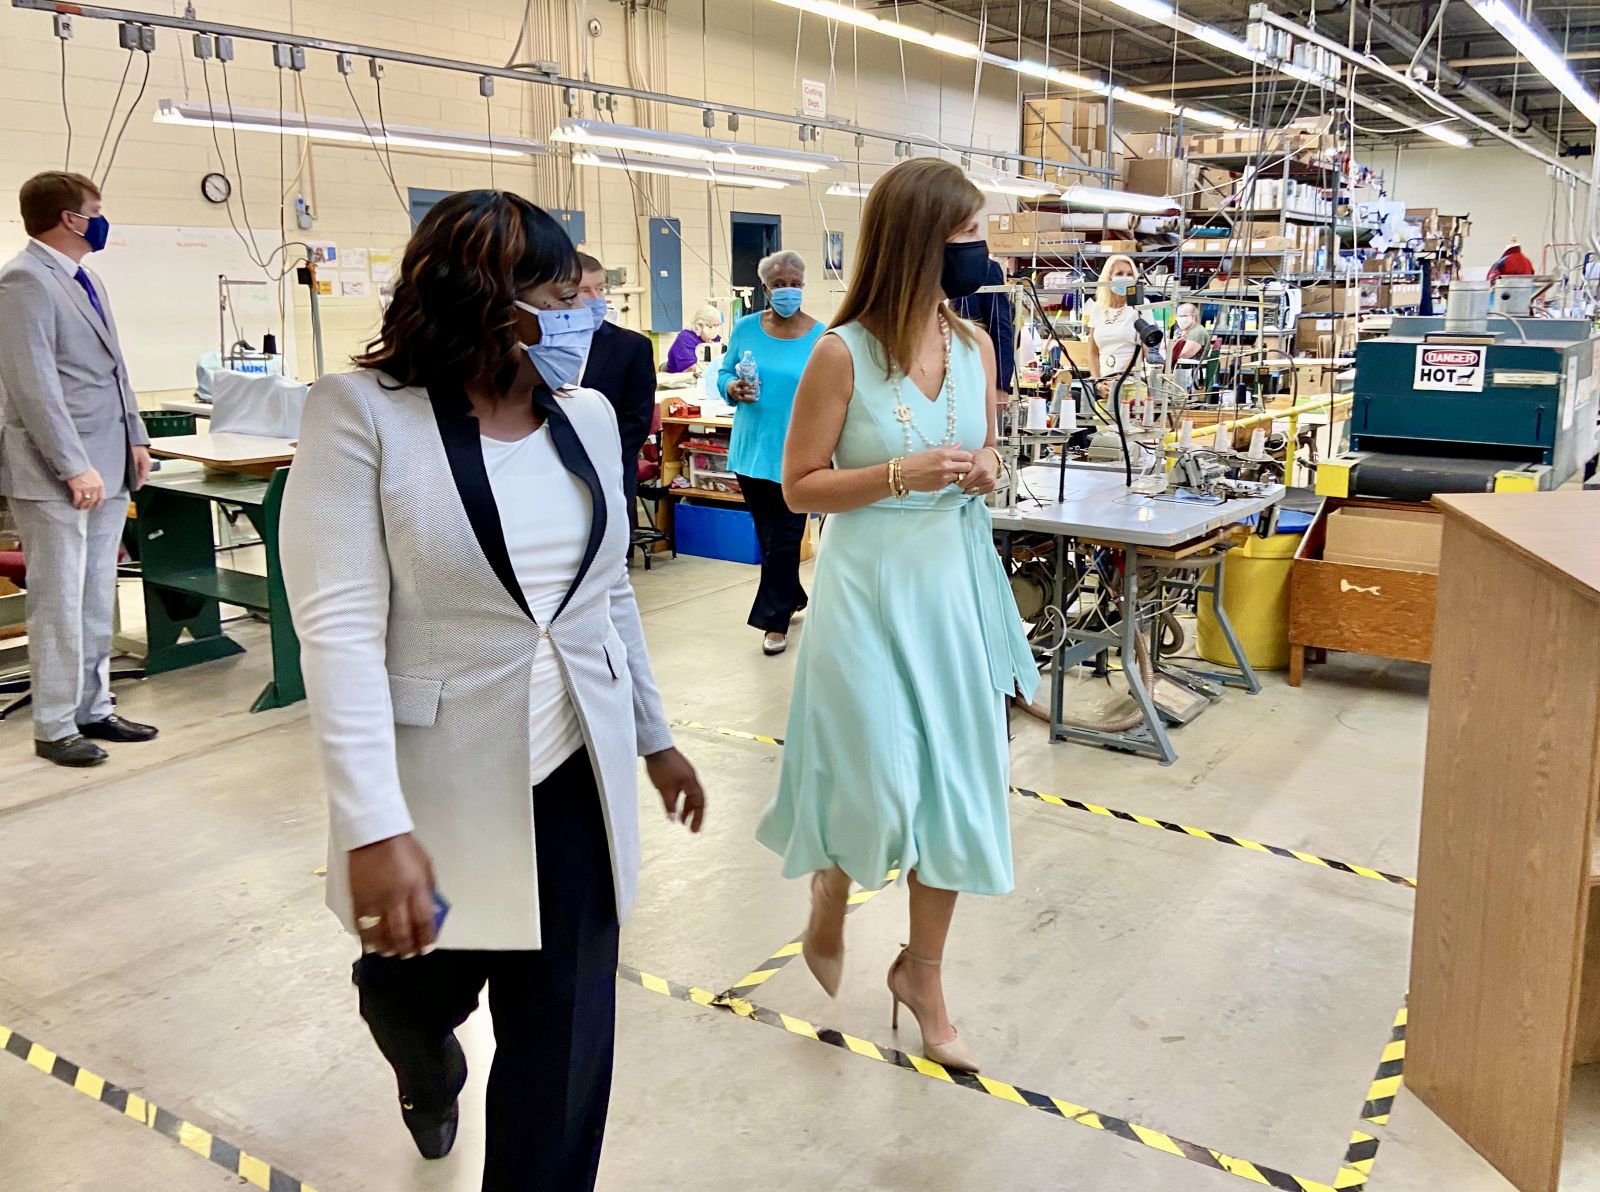 Lt. Gov. Pamela Evette tours Jostens with Nickey Reddix, manager of operations. (Photo/Provided)